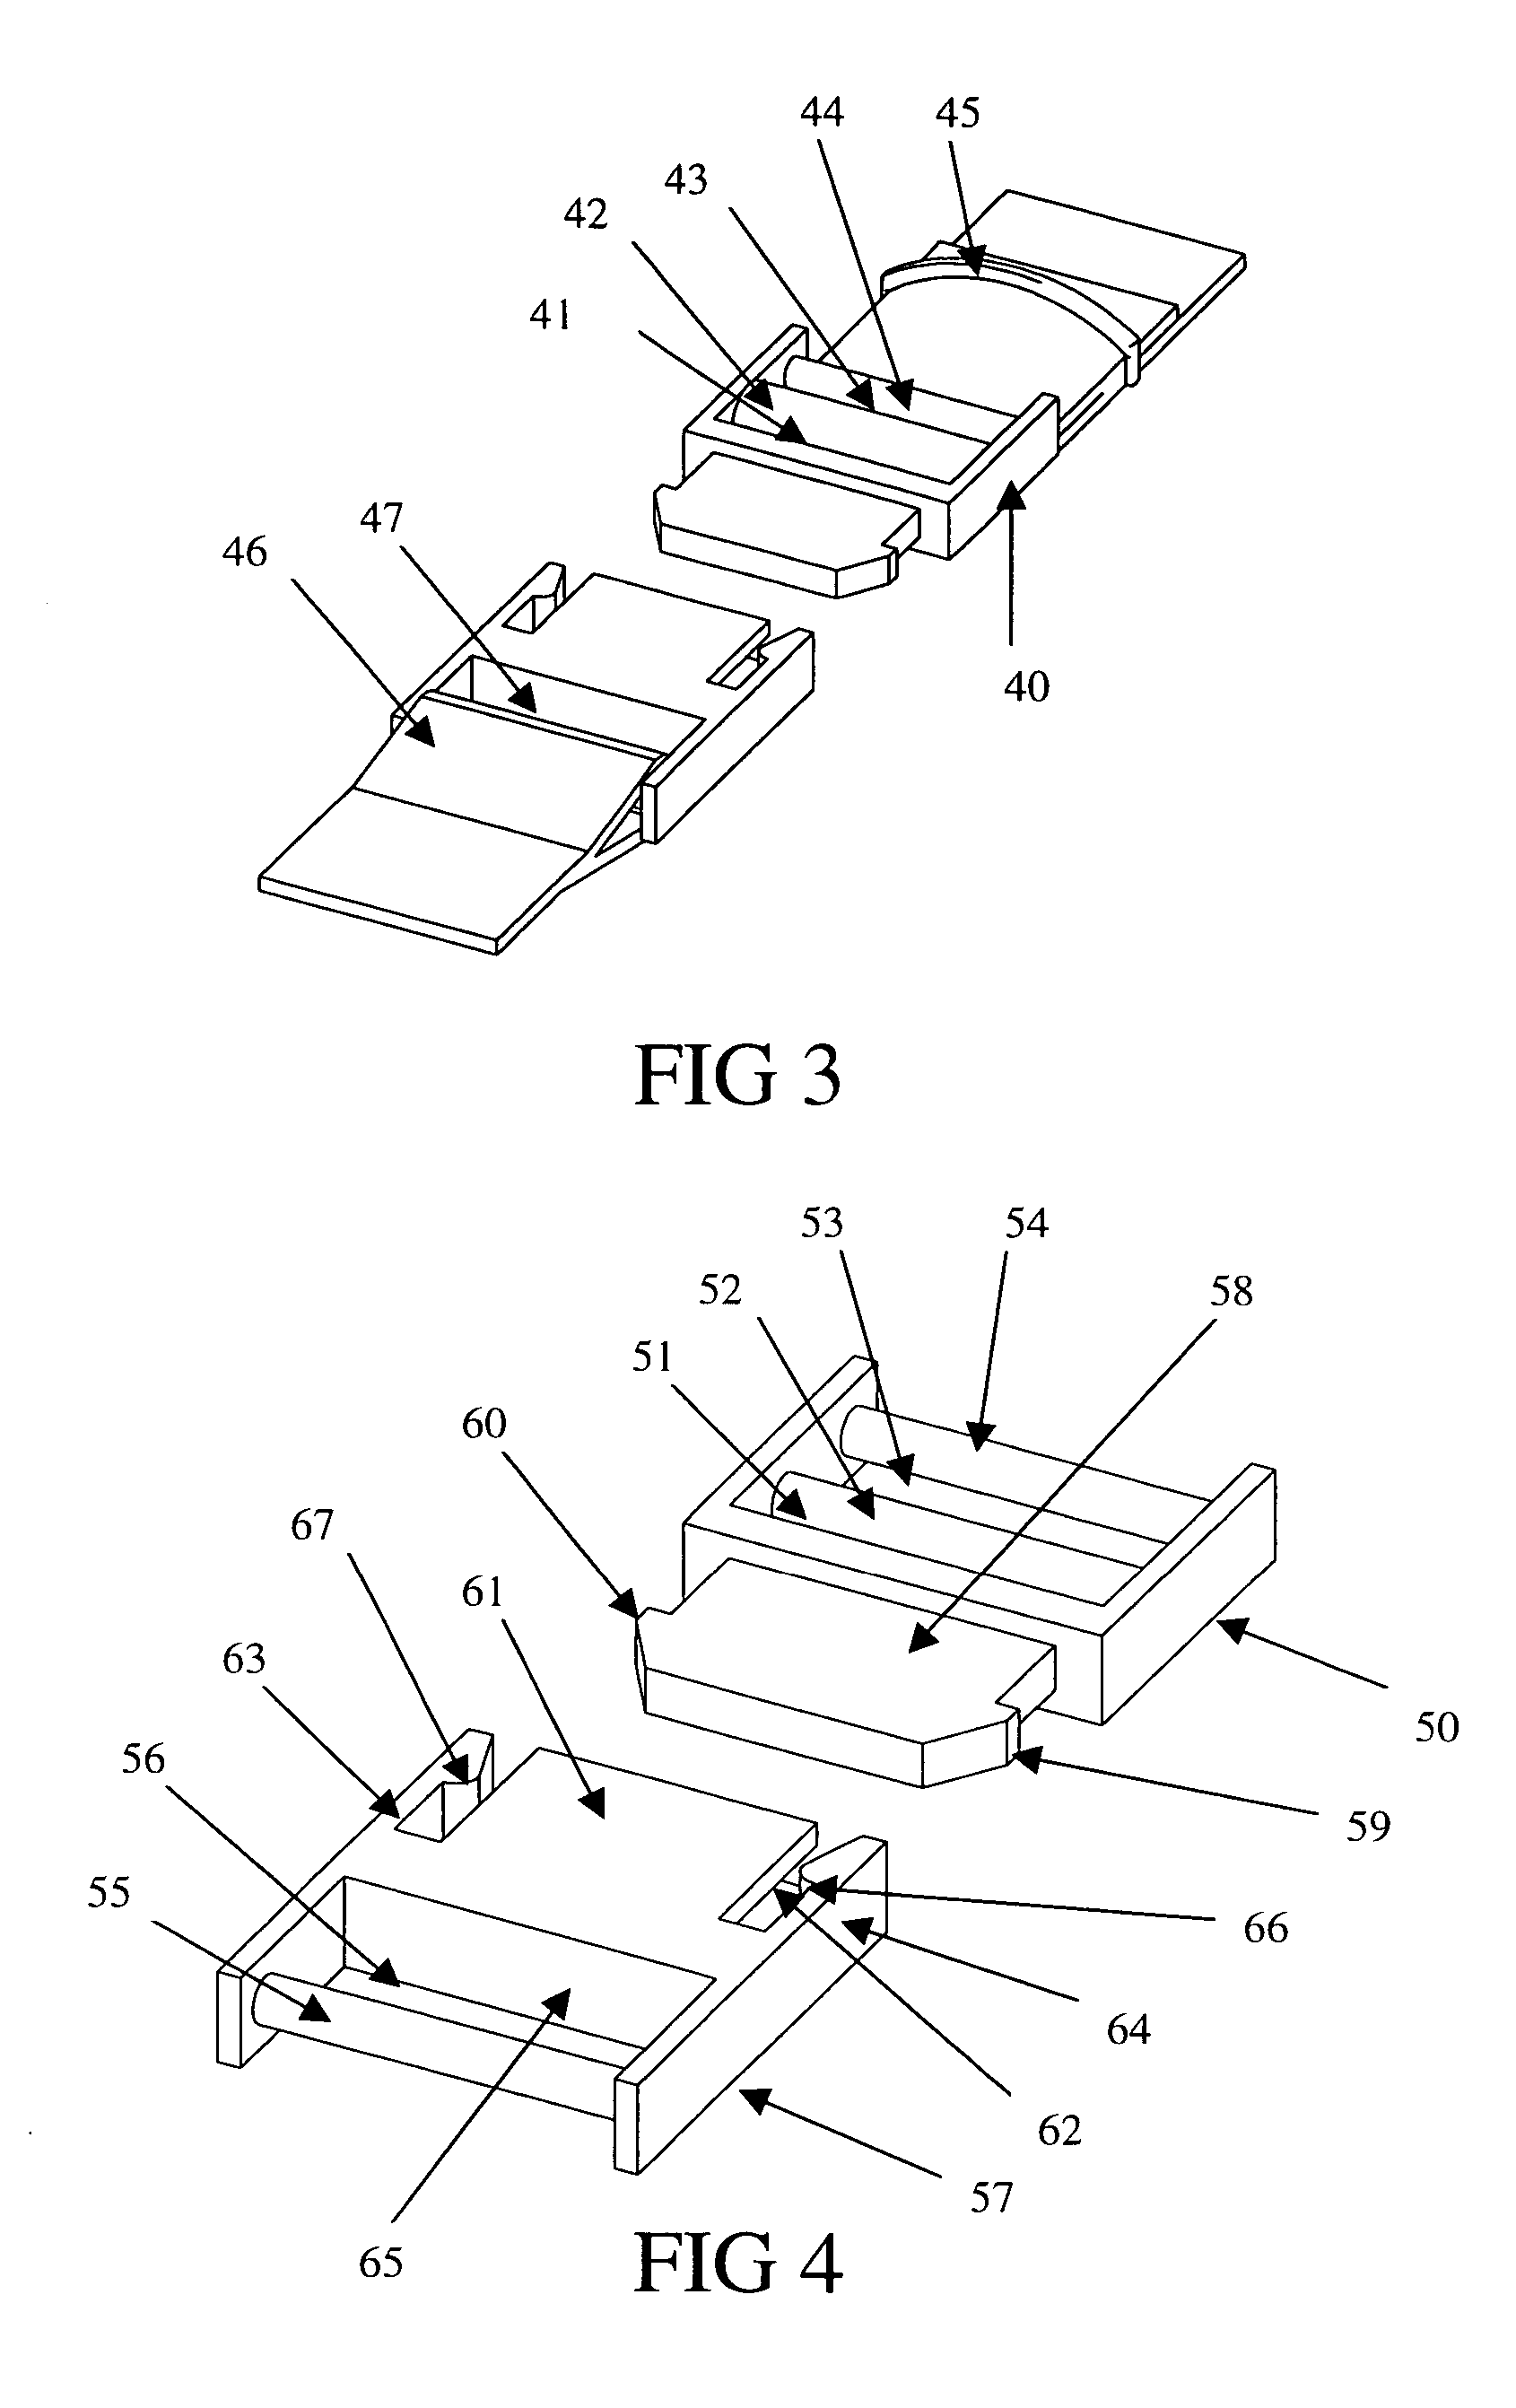 Three-dimensional reflective collar with a tiered force releasable buckle and parasitic protection band support